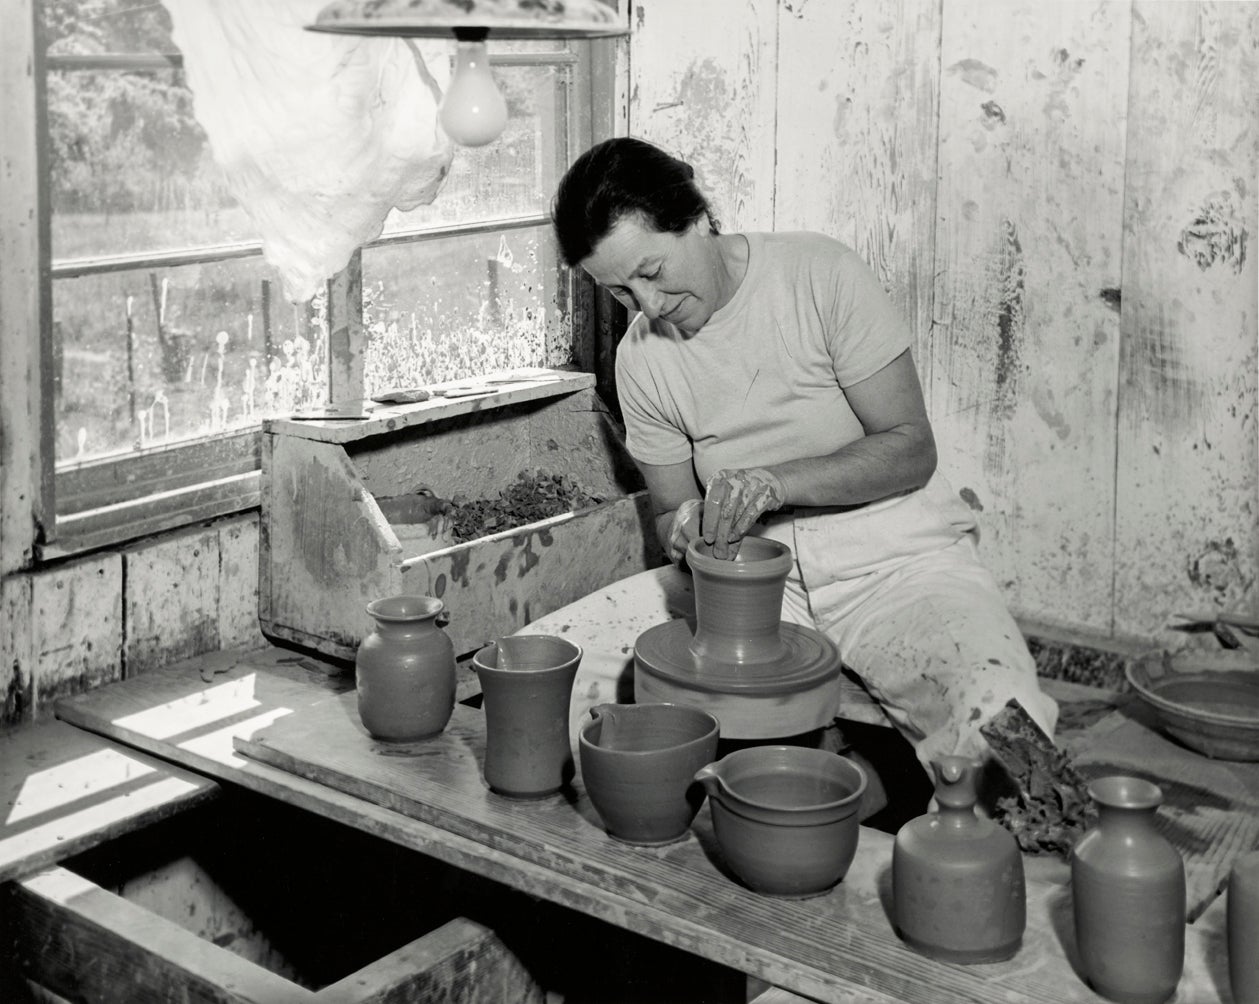 Marguerite Wildenhain working in her studio  c. 1950 Guerneville, California Courtesy of Archives of American Art, Smithsonian Institution R2022.0605.001